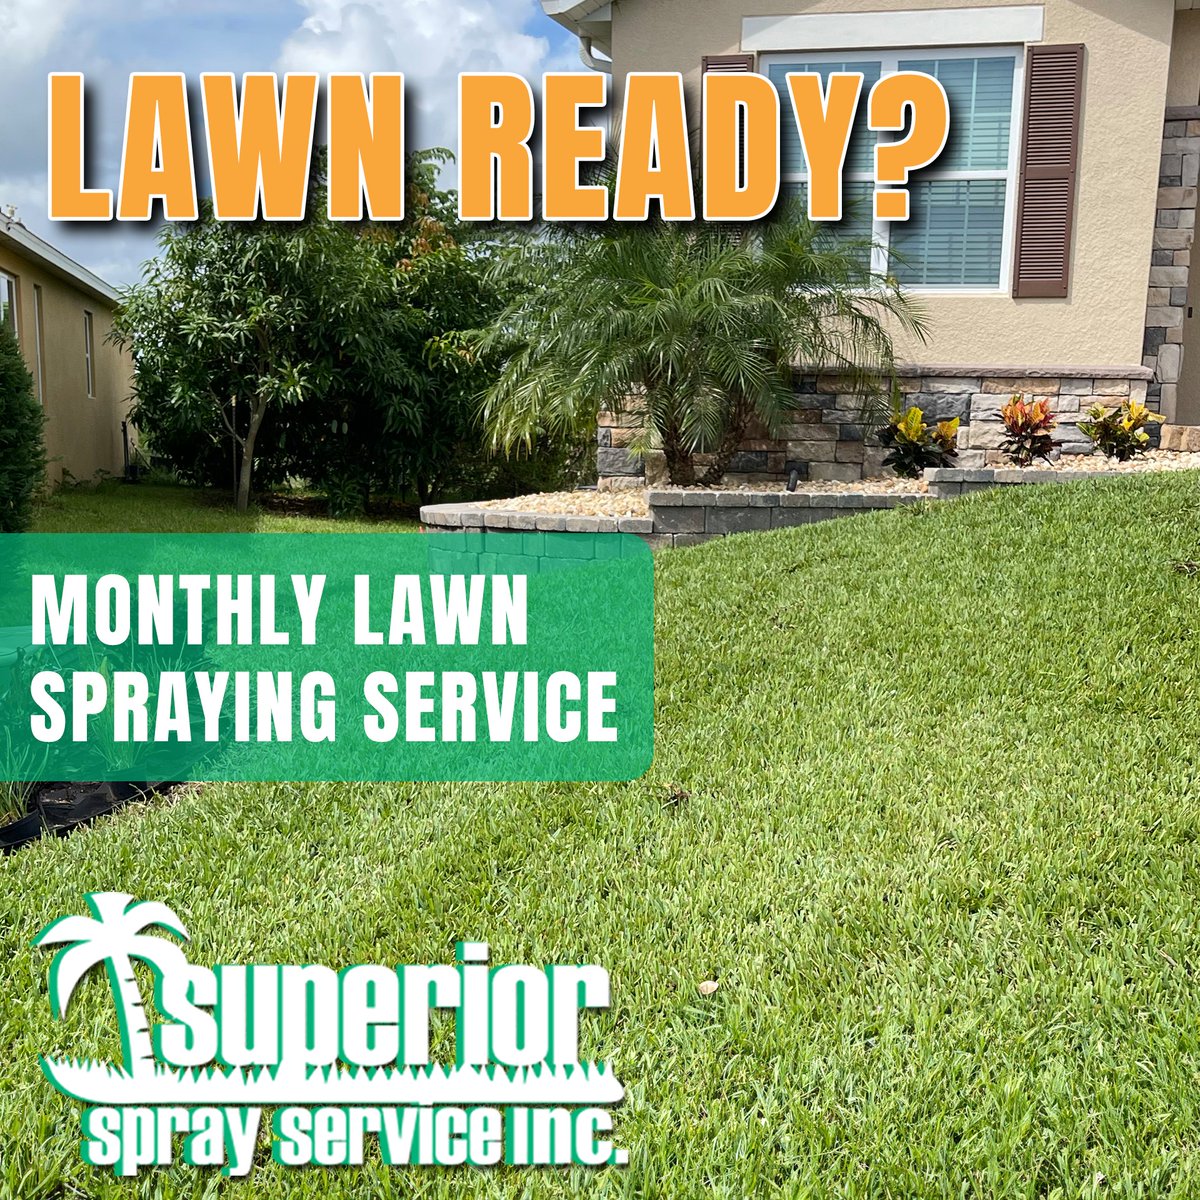 🌿✨Is your lawn summer ready? Superior Spray Service experts can take care of your lawn care needs from aeration to insect, weed, and disease control. 
📞 Call 863-682-0700 
🌐 superiorspray.com
#SuperiorSprayService #pestcontrol  #LawnCare #Lawnspraying #CentralFlorida